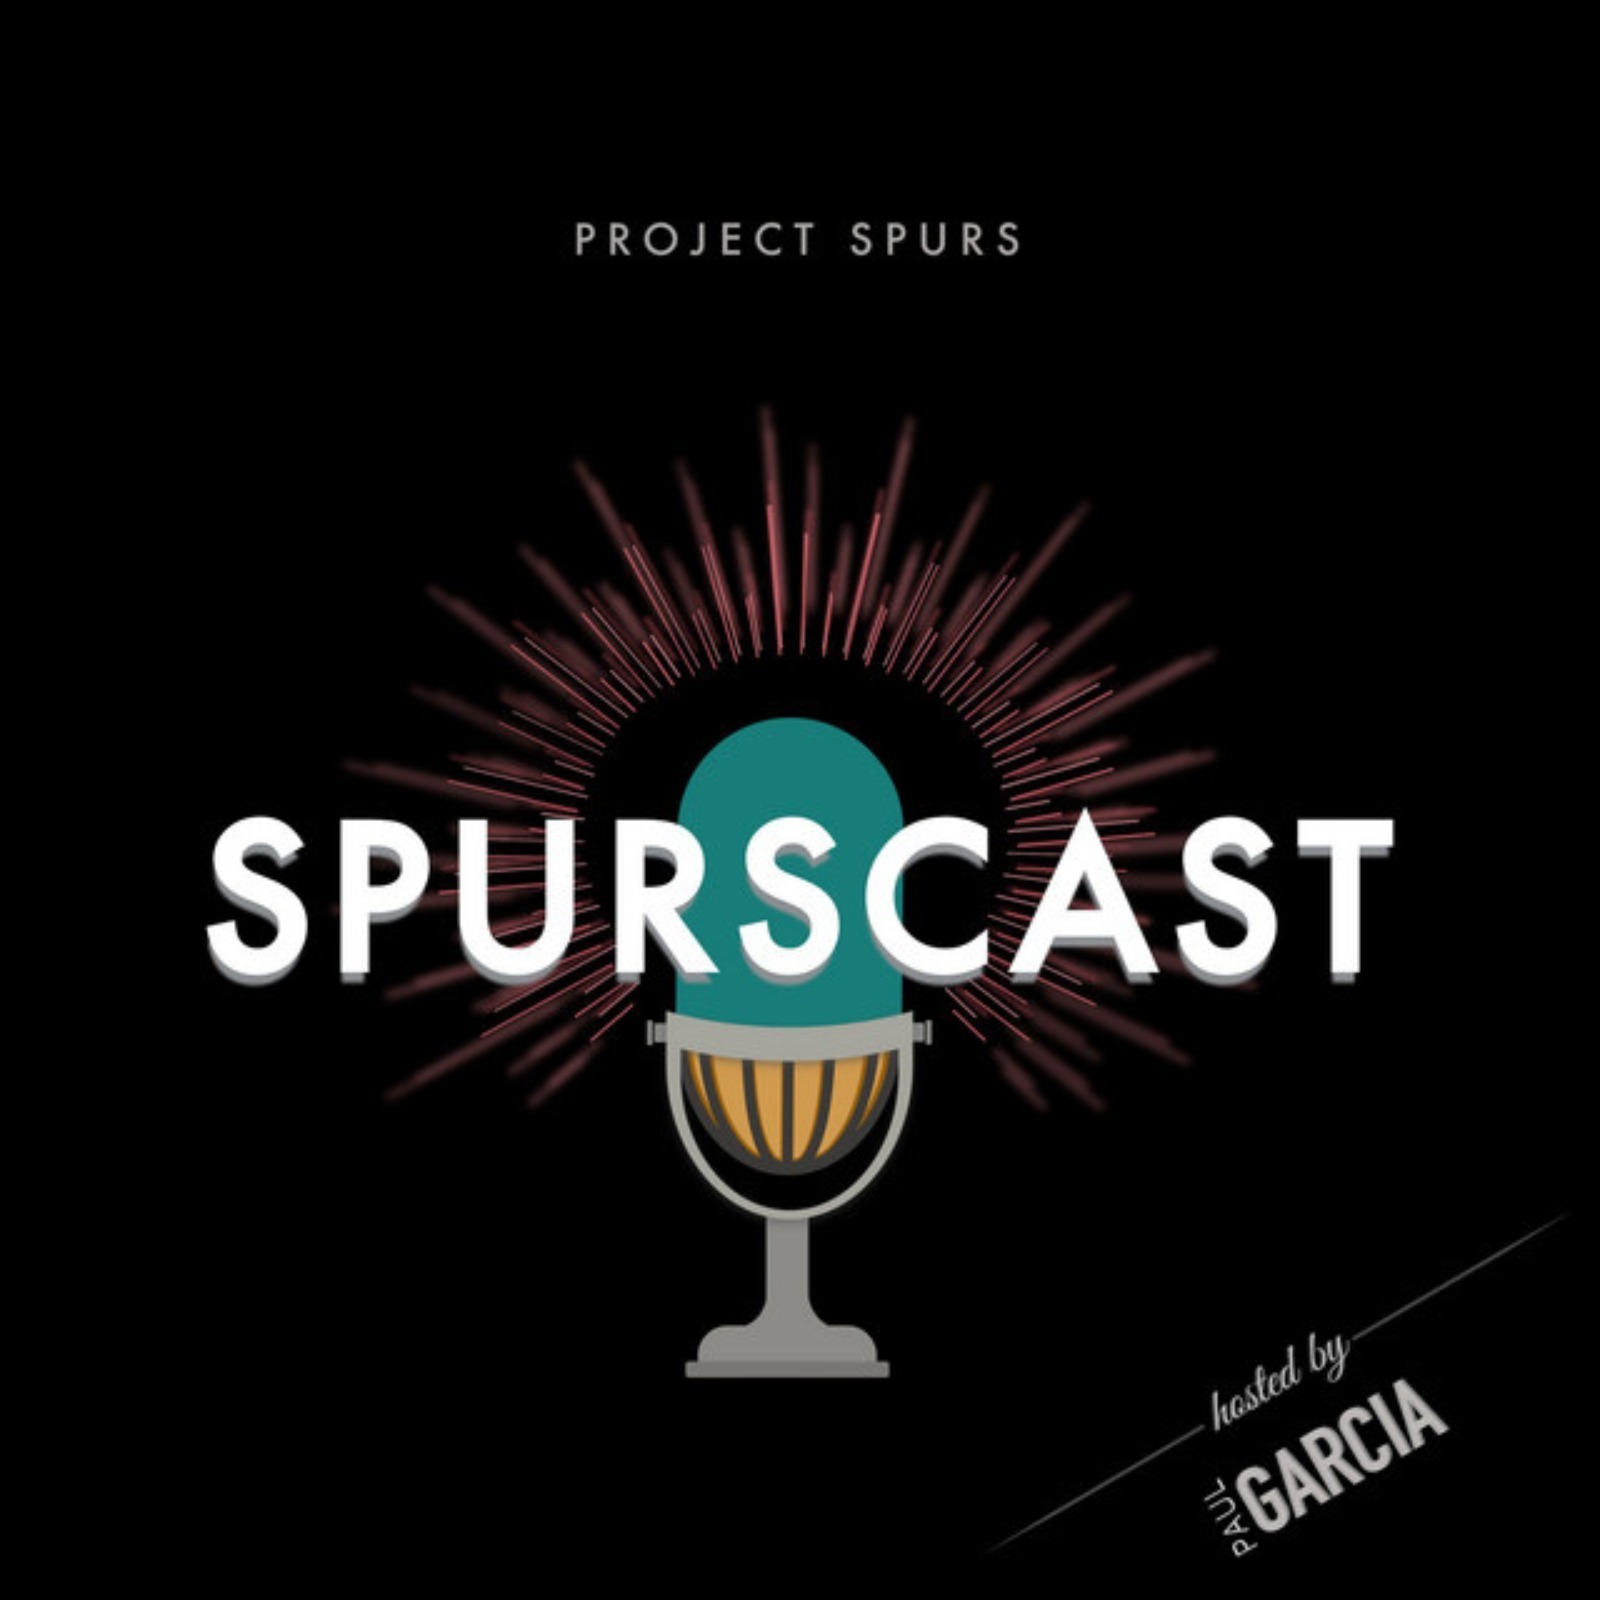 Spurscast Ep. 740: Wemby and Spurs in Last 4 Games, Lottery Race Update